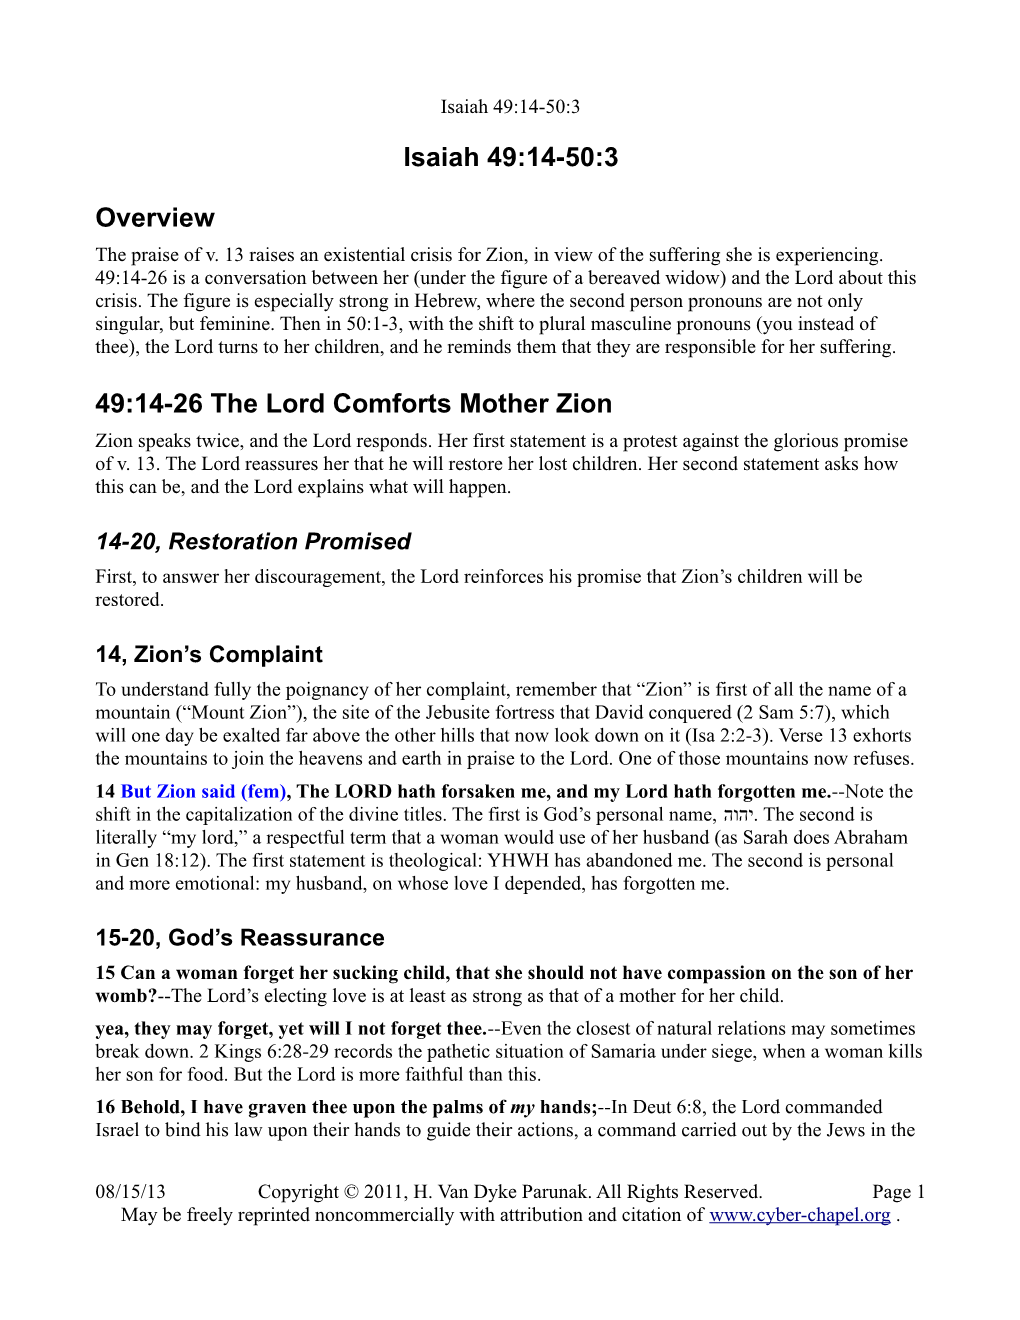 Isaiah 49:14-50:3 Overview 49:14-26 the Lord Comforts Mother Zion